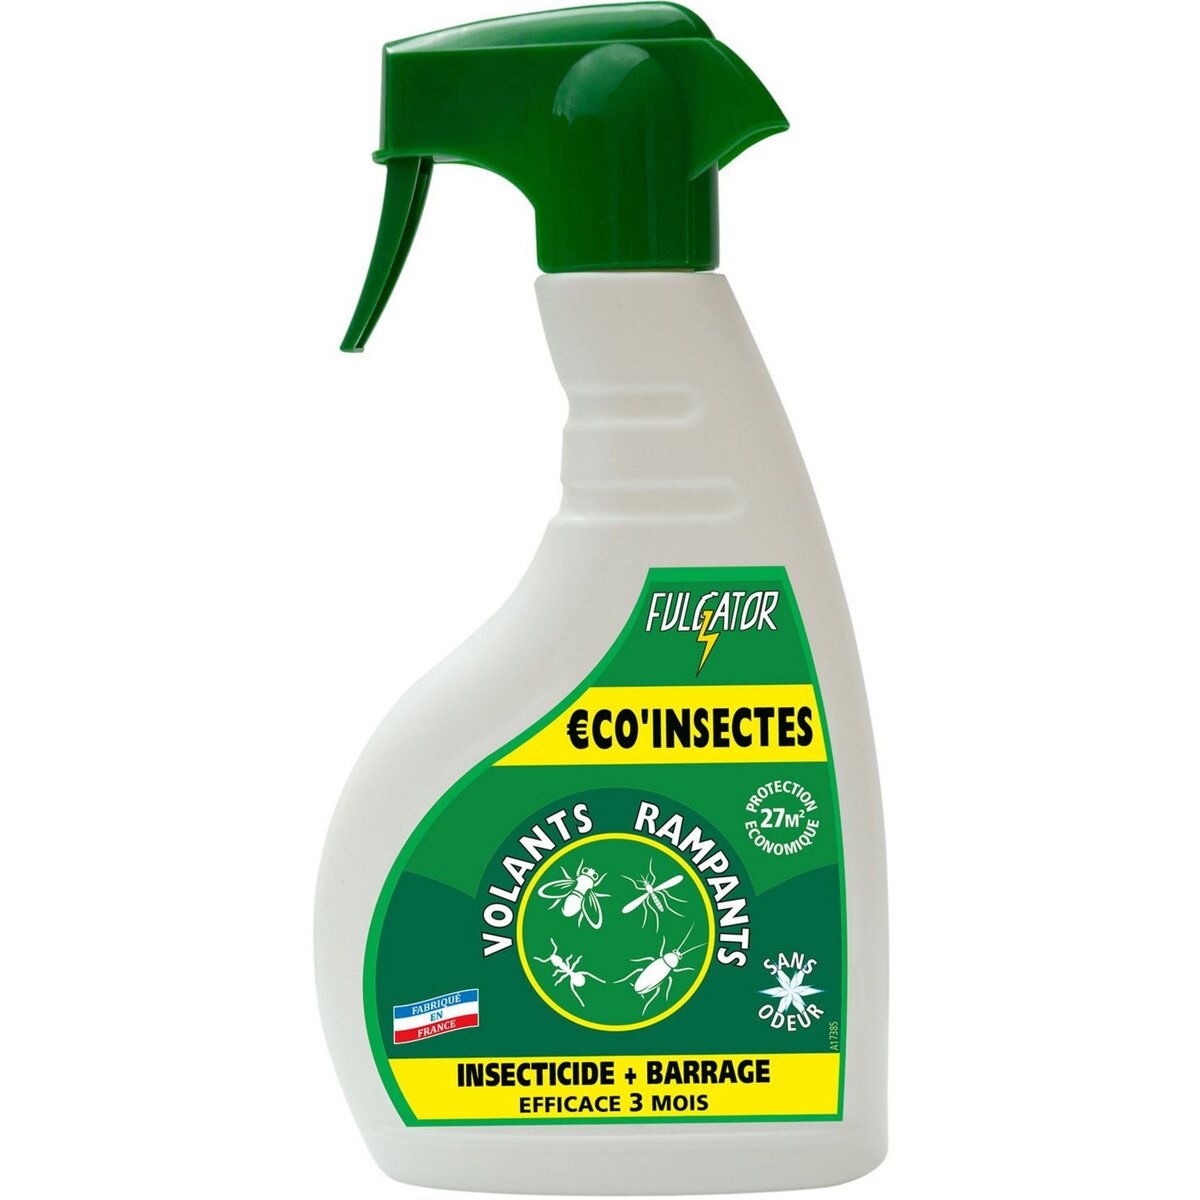 Fulgator insecticide universel avec action barrière 500 ml